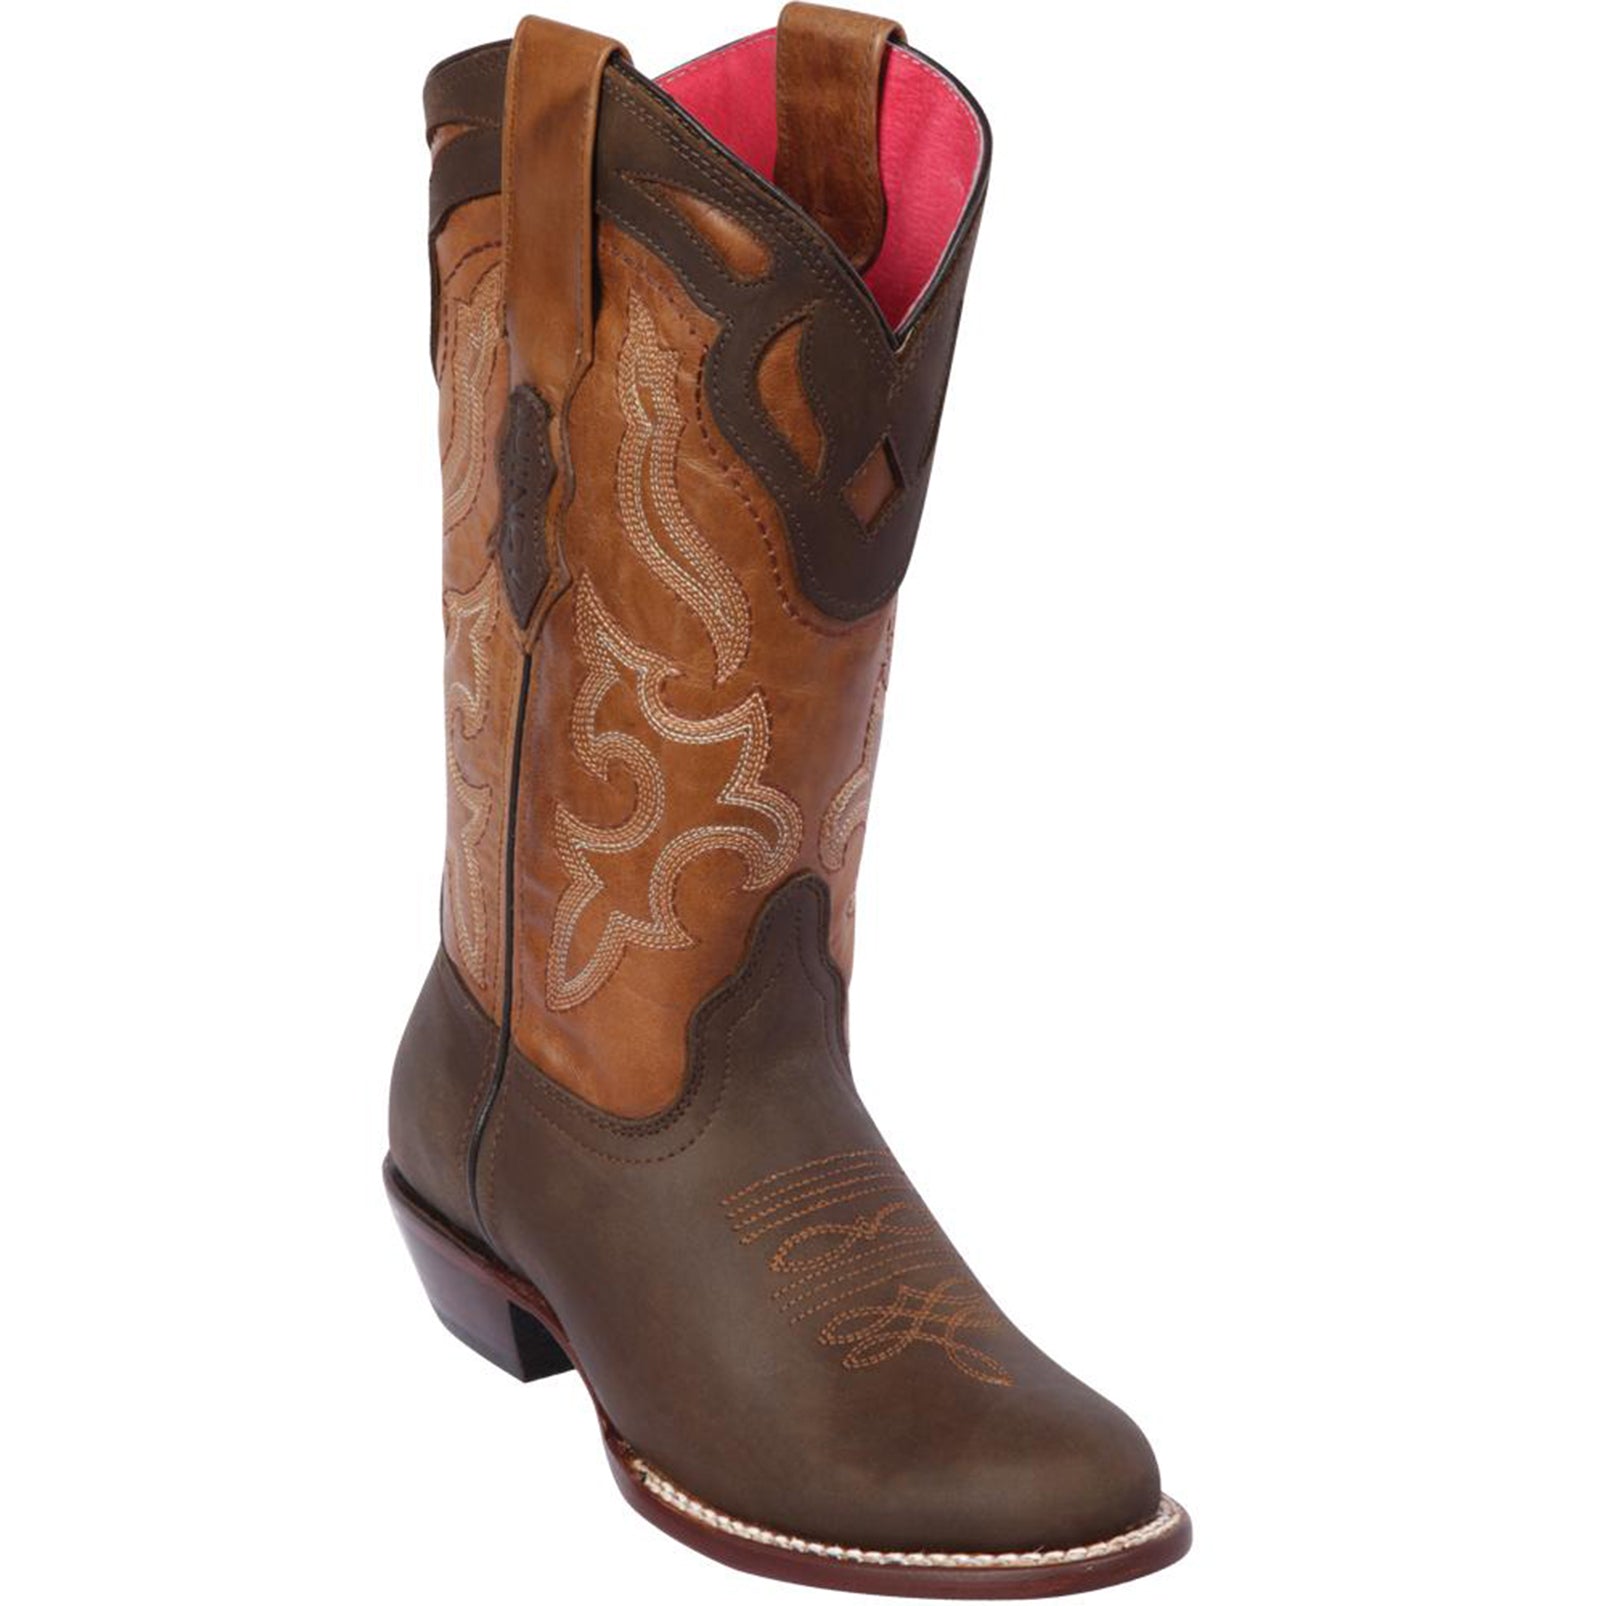 Womens Cowboy Boots & Cowgirl Boots | Vaquero Boots – Page 3